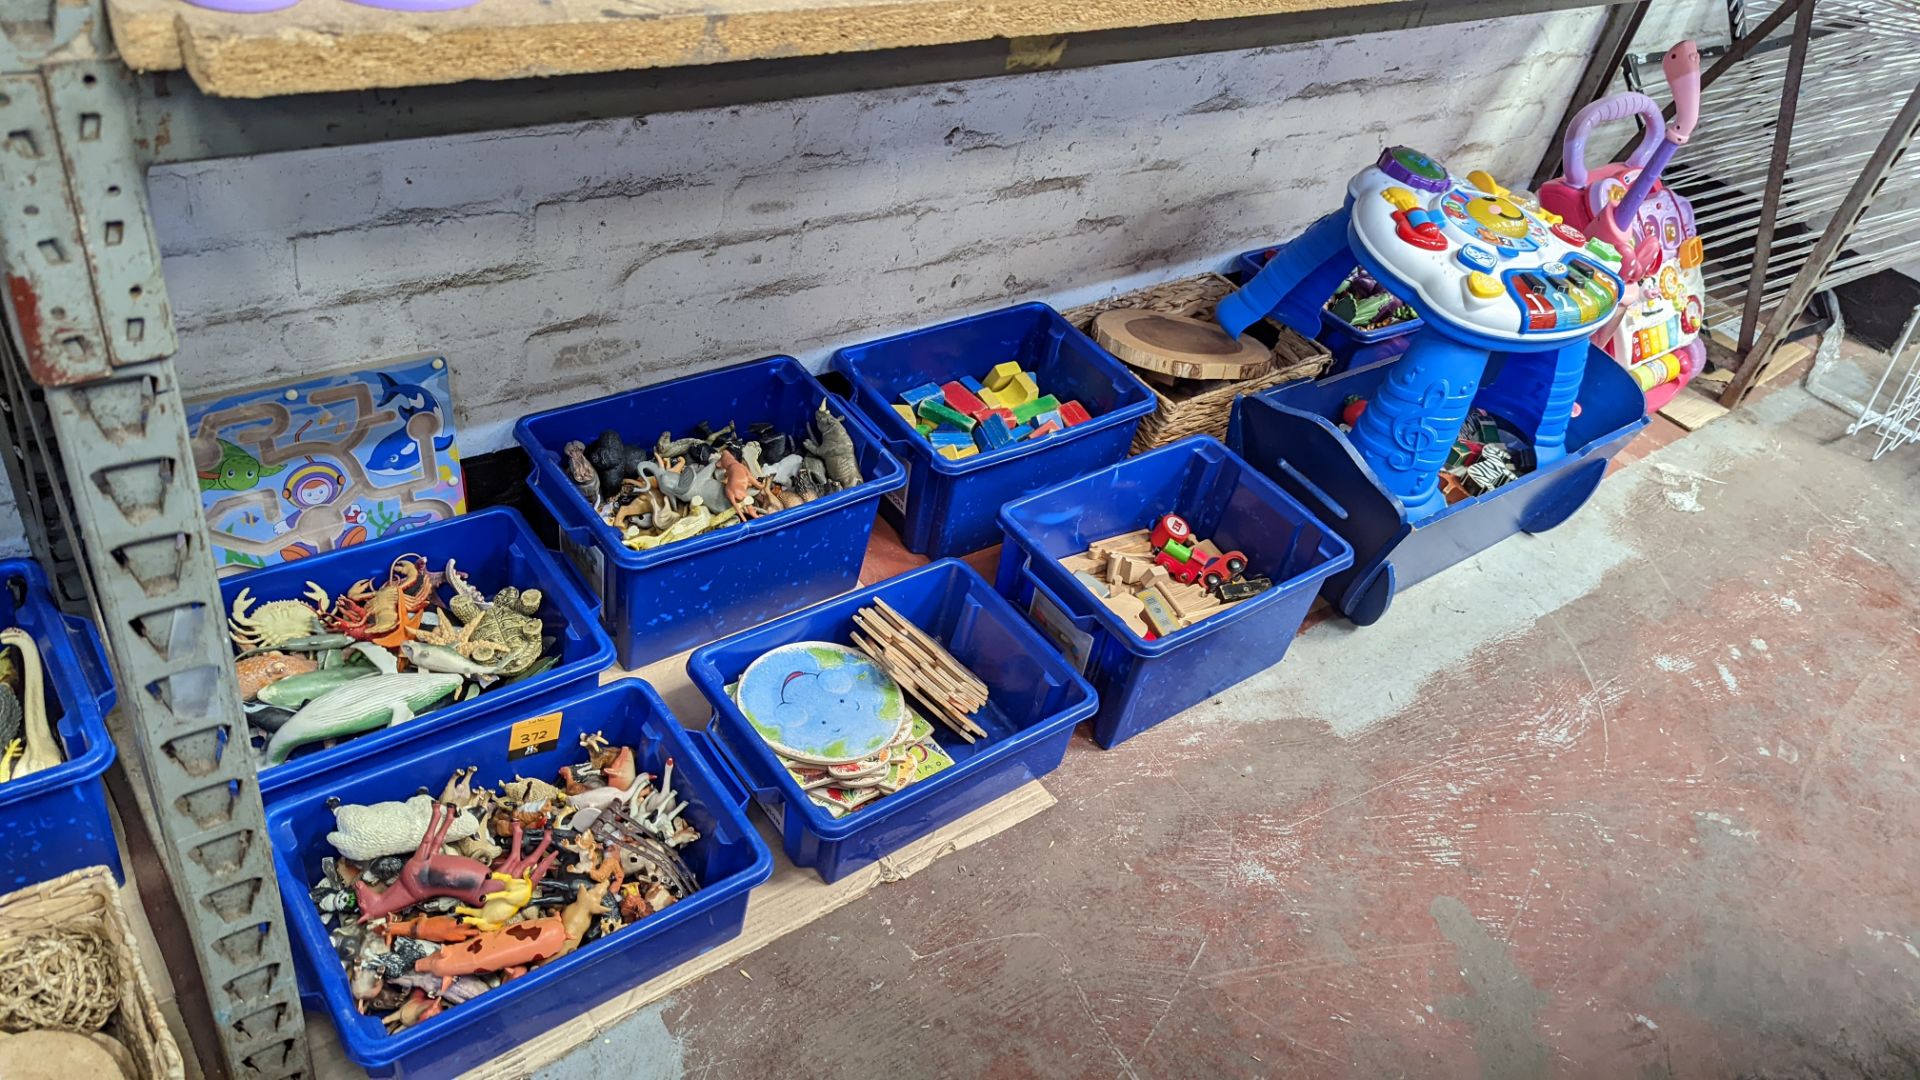 Contents of a bay of children's toys - all crates included